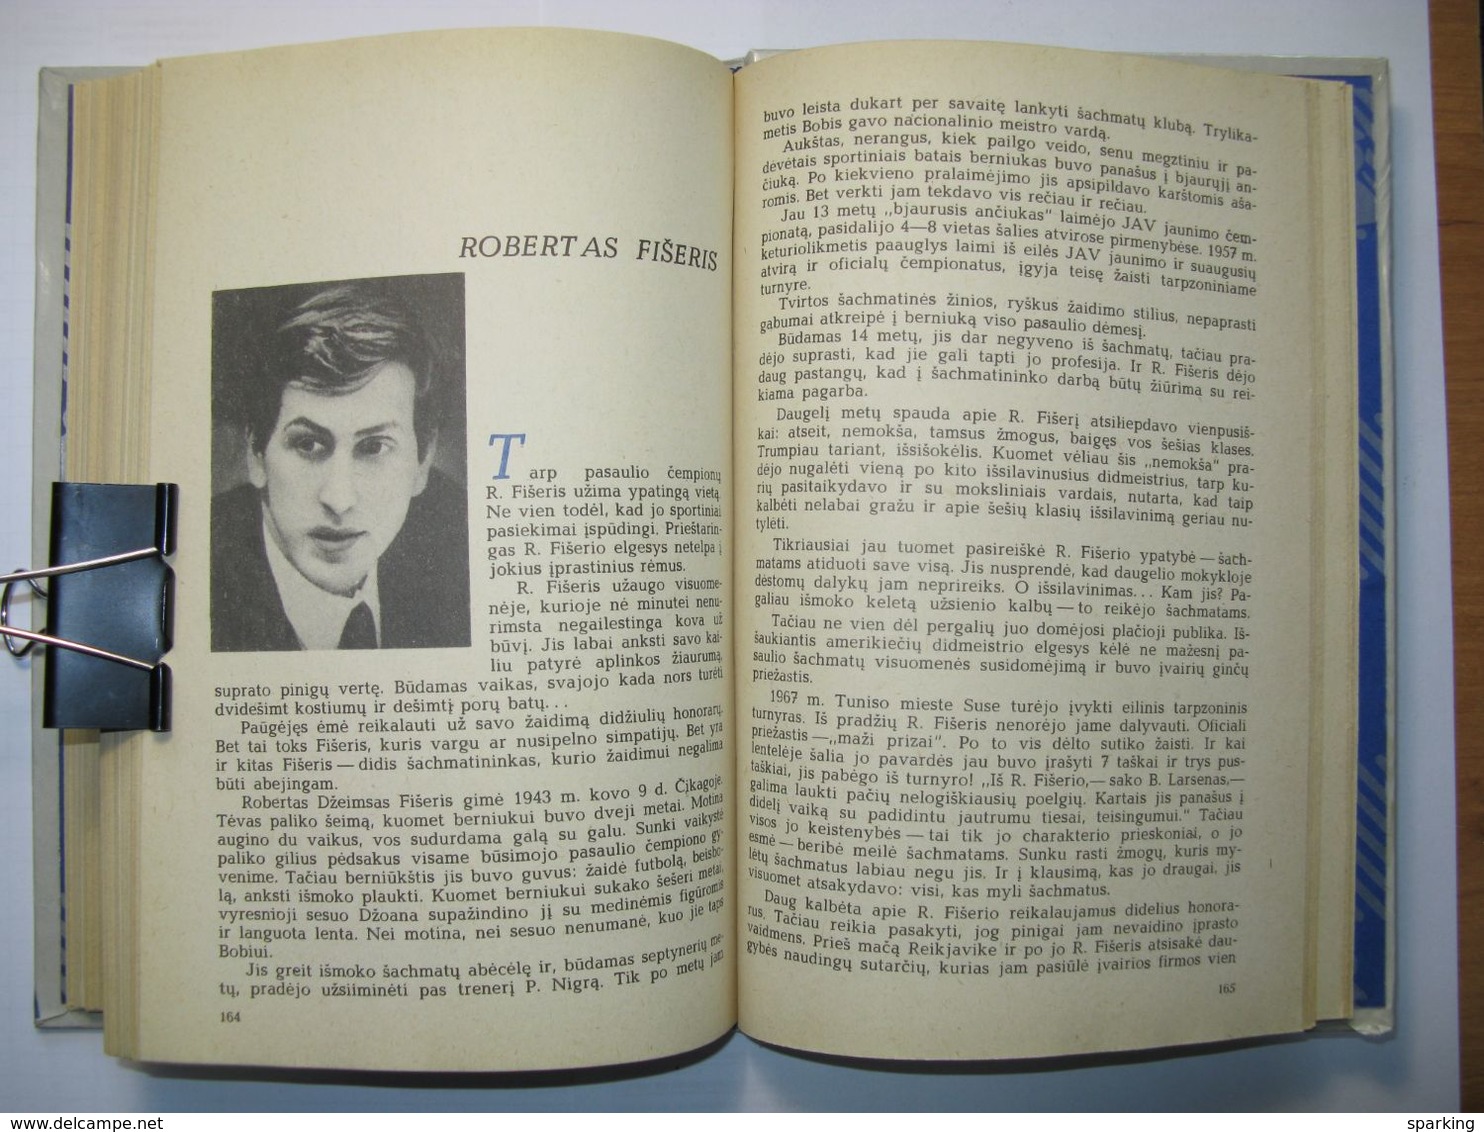 Chess Puskunigis Selected games of world champions in Lithuanian 1983